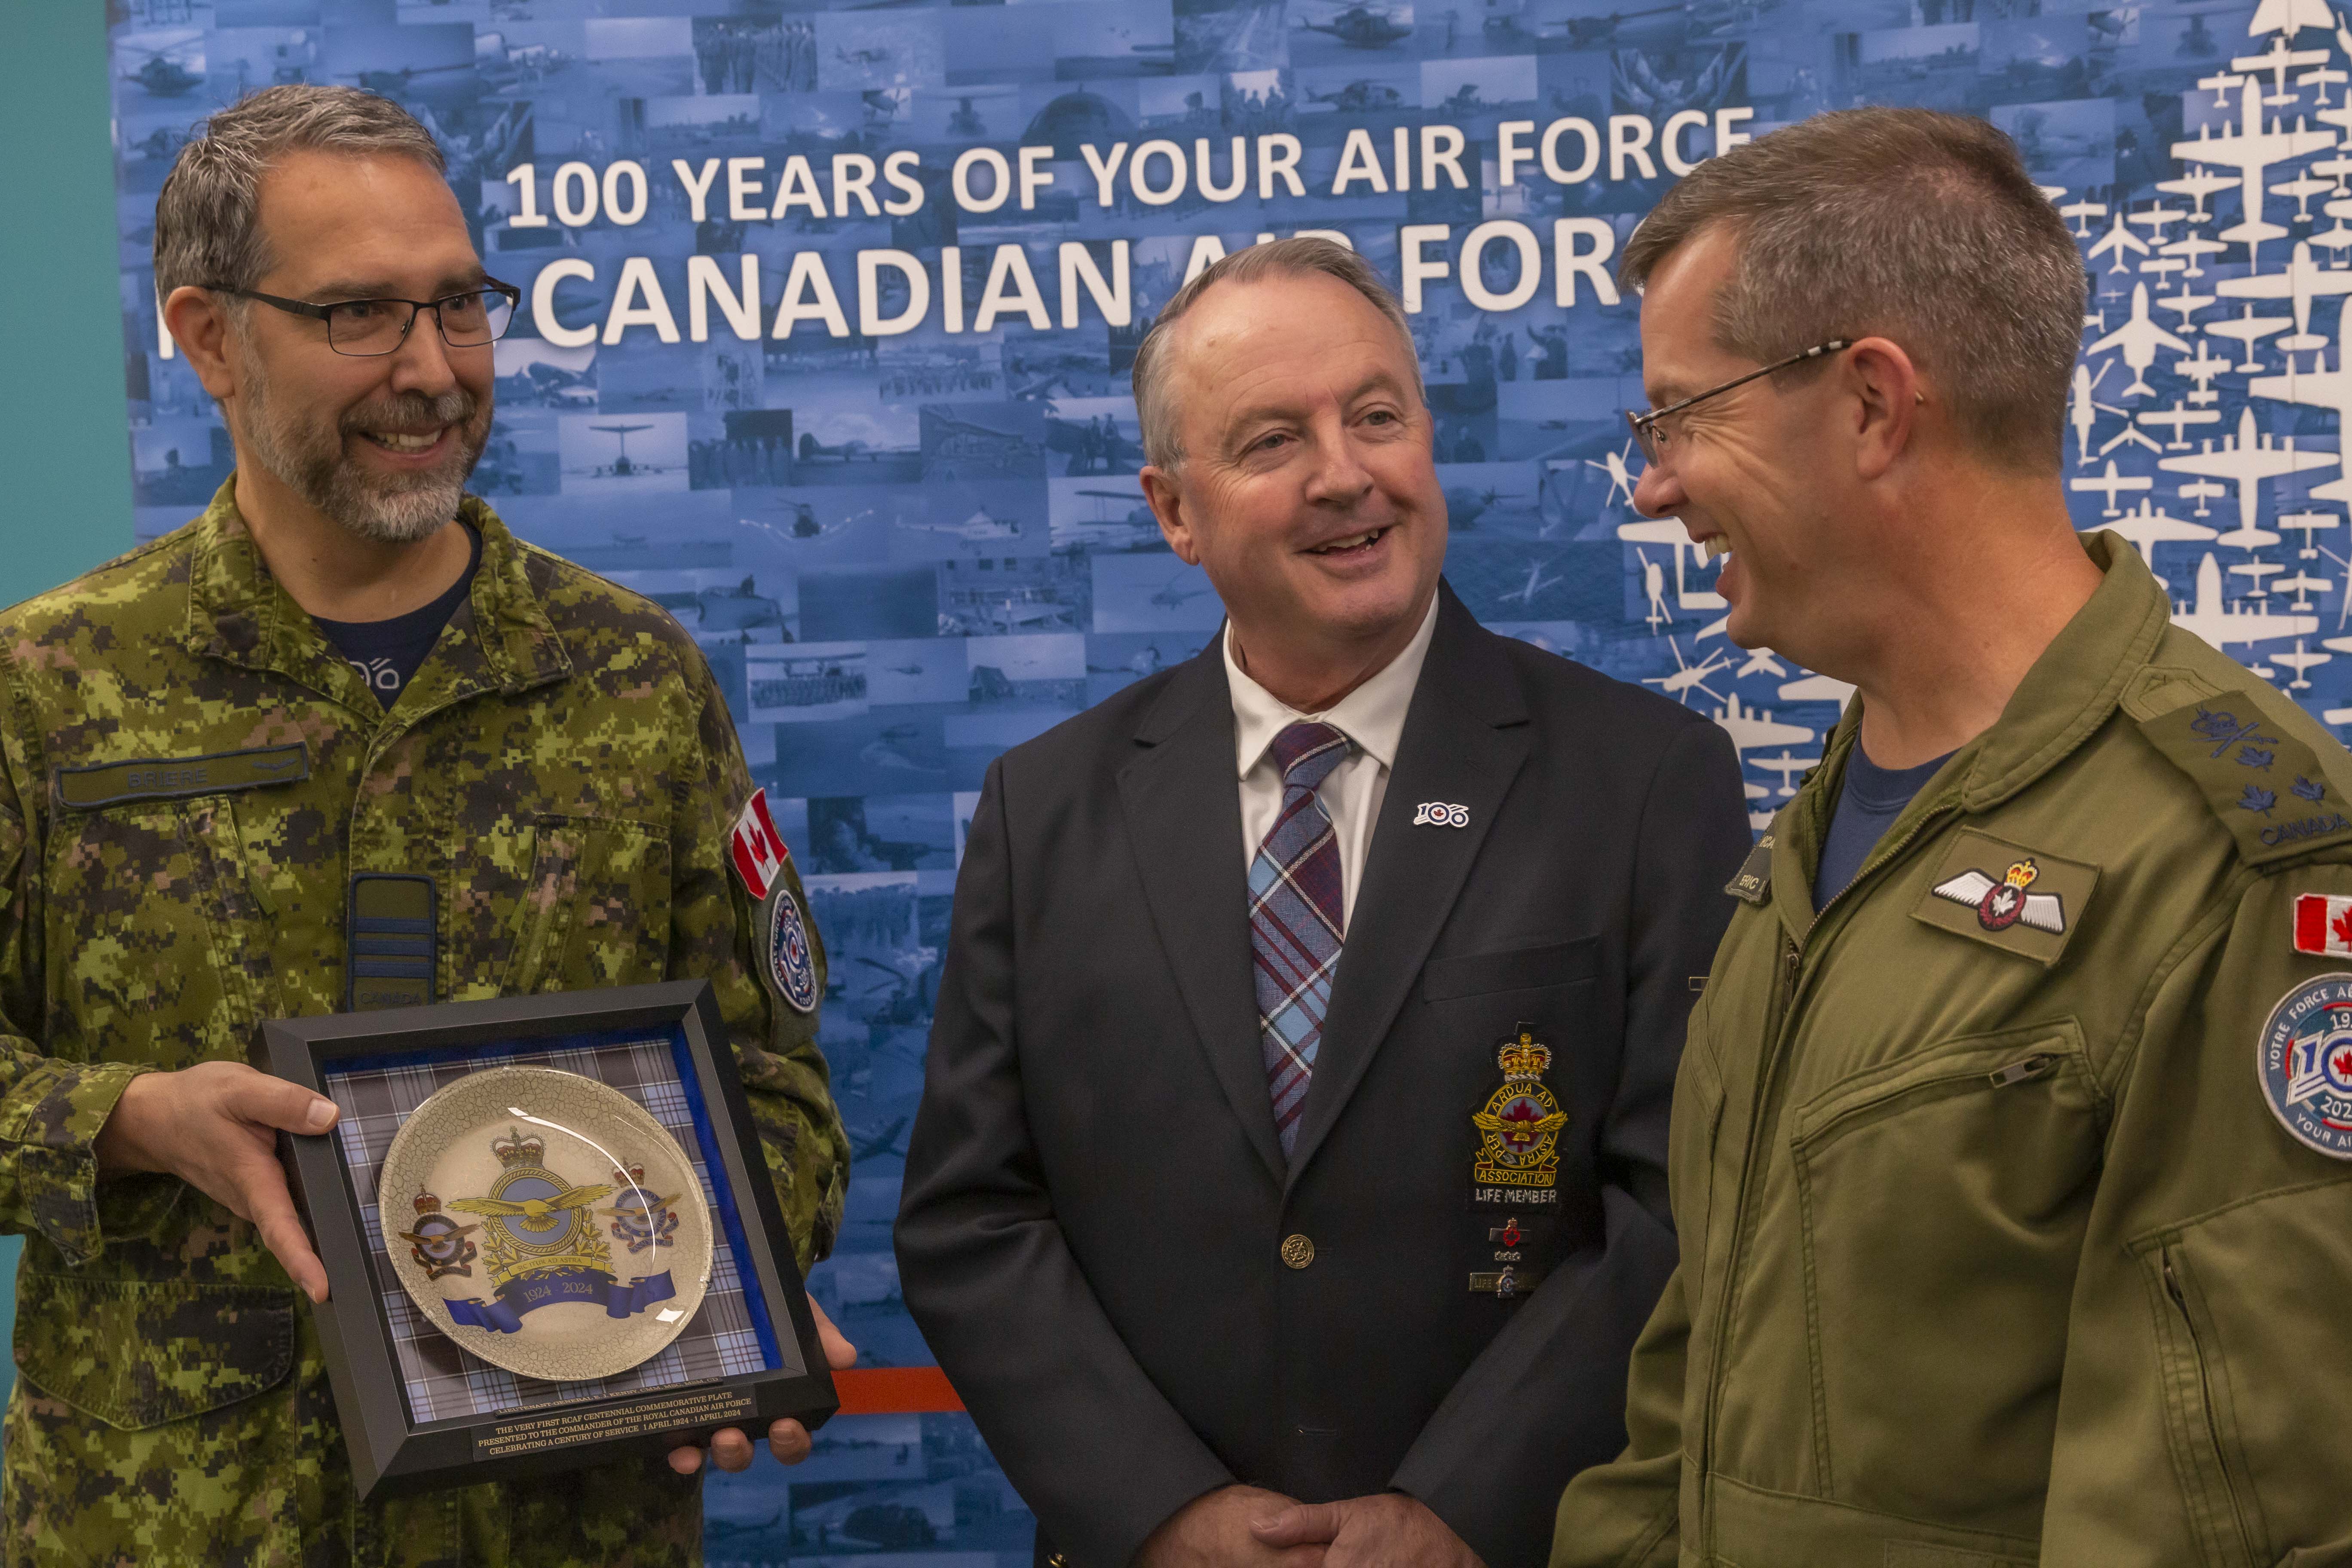 RCAF 100 - Royal Canadian Air Force Centennial Commemorative Plate